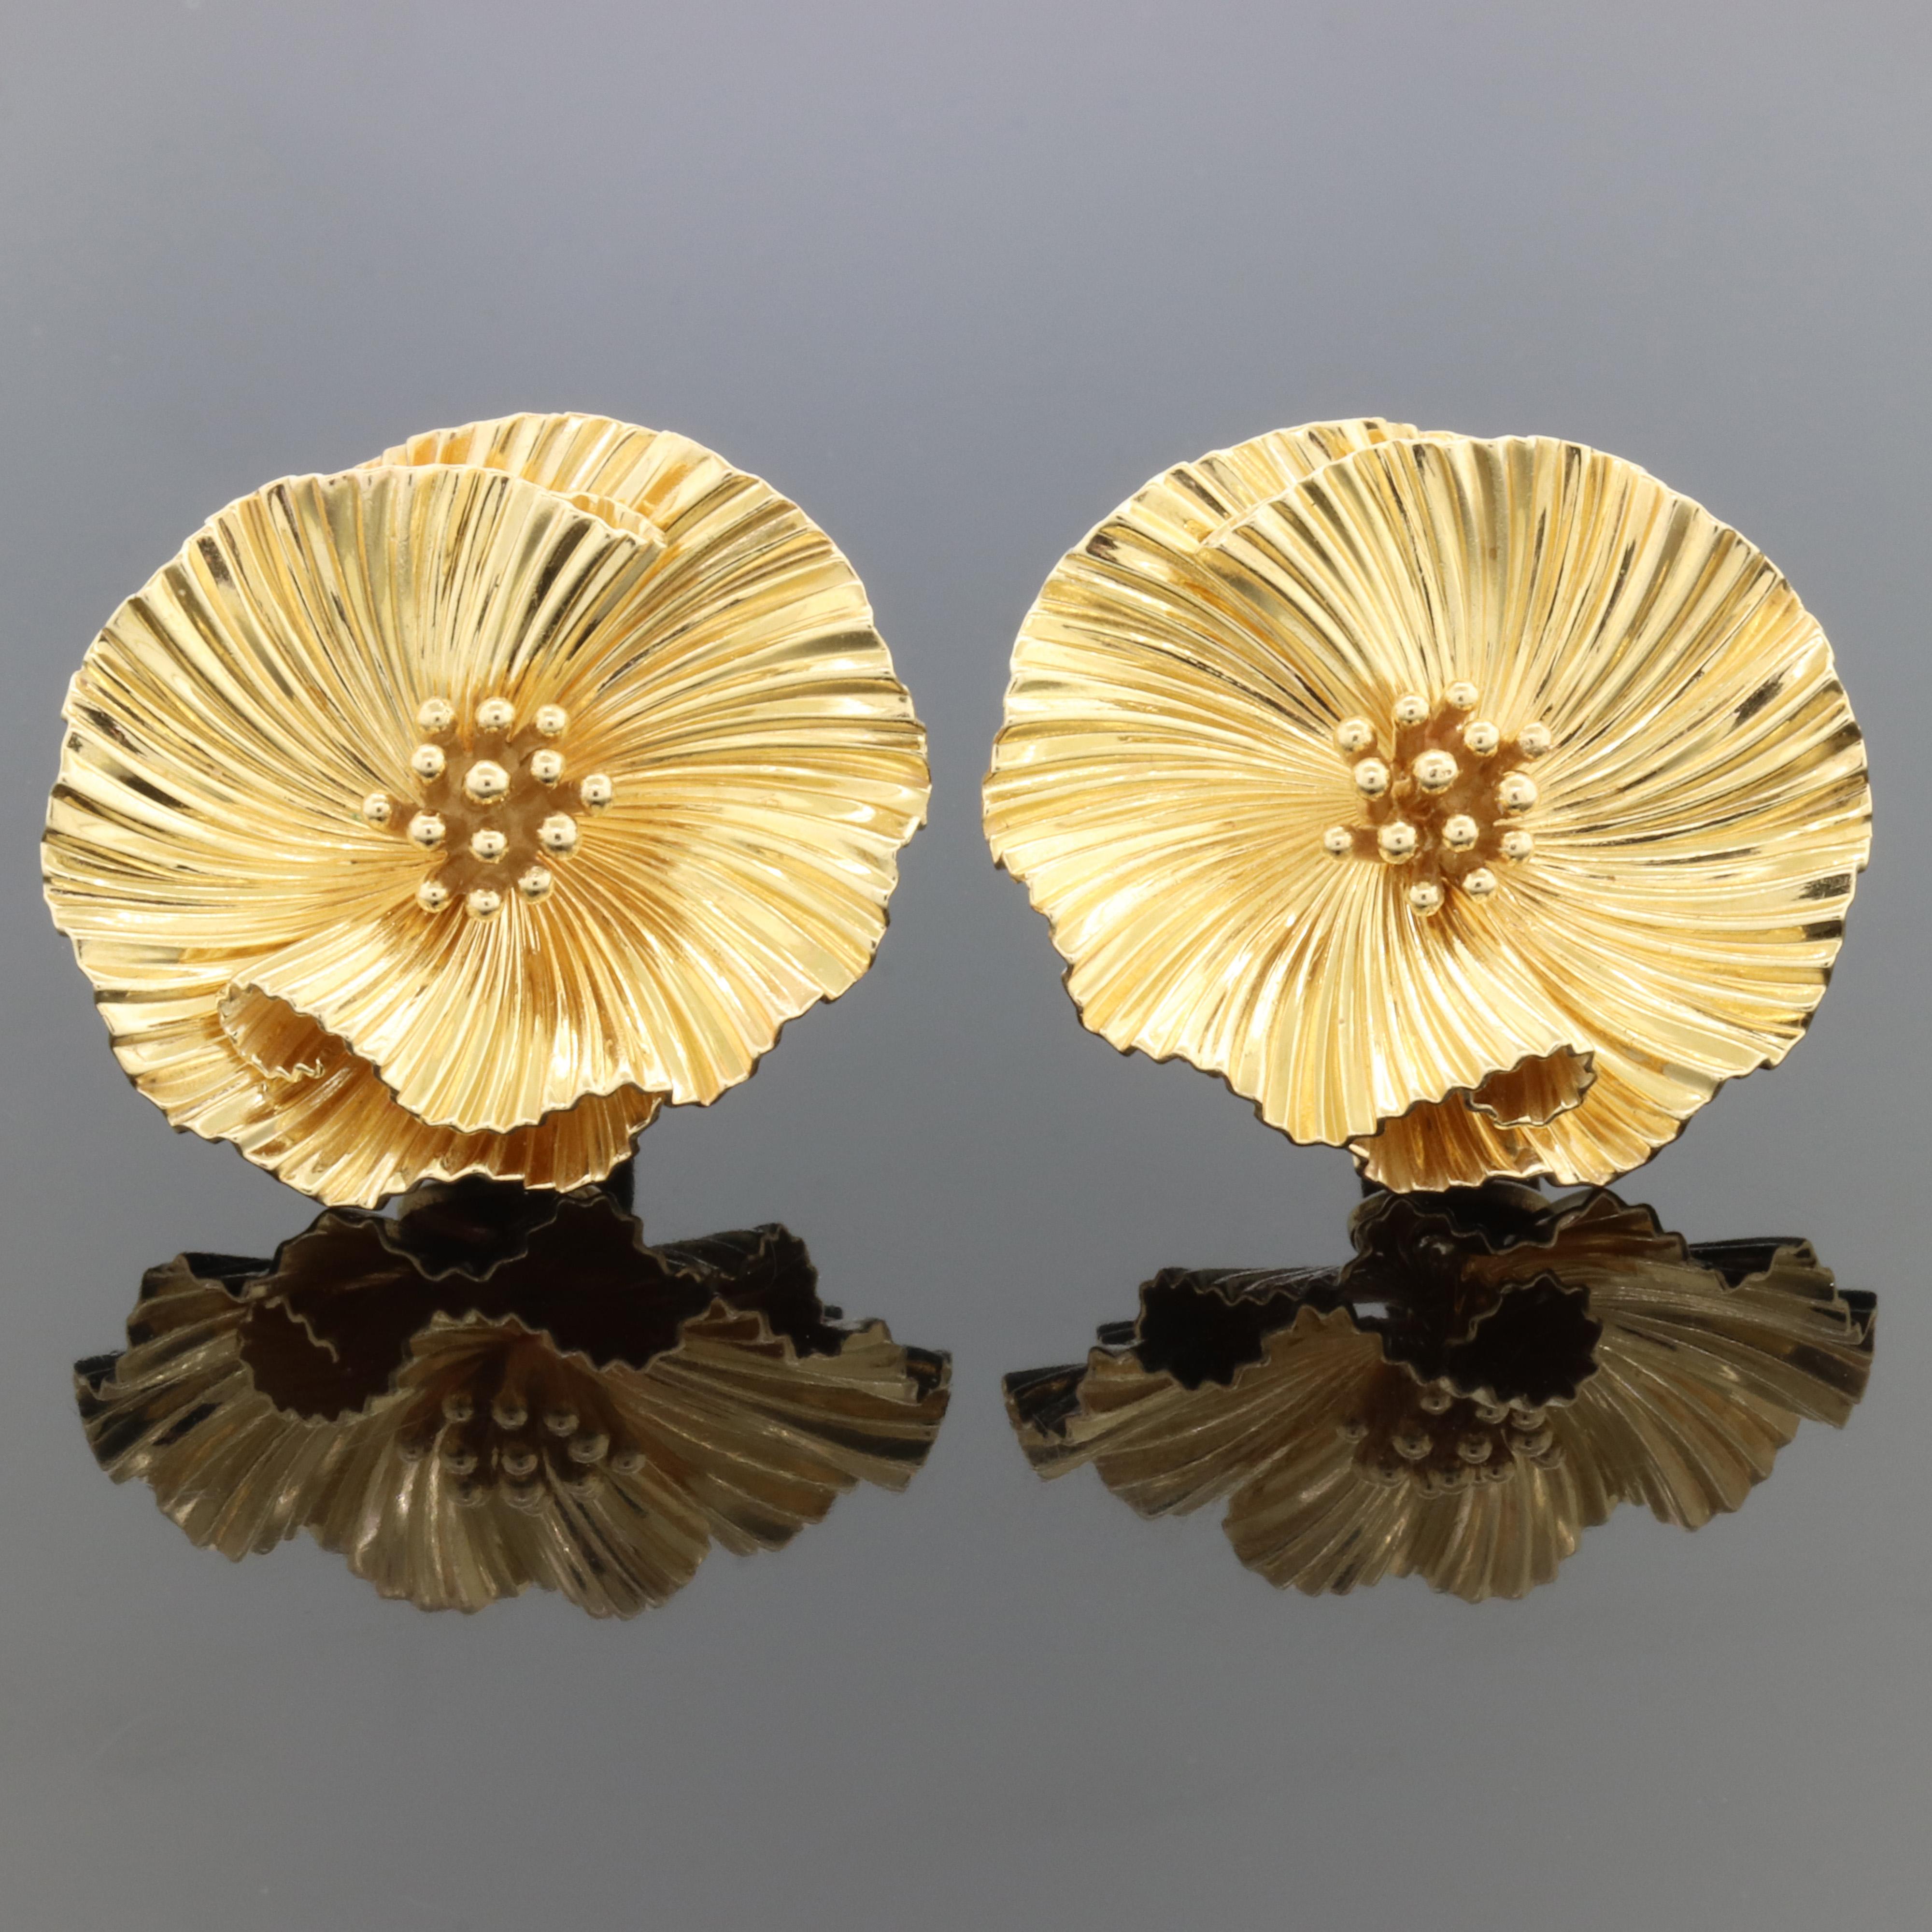 Iconic and stylish pair of  George Schuler yellow gold flower clip on earrings
These yellow gold ruffled flower clip earrings are very high quality throughout, as all of Shuler's items were. They feature the extremely comfortable 1947 patented clip